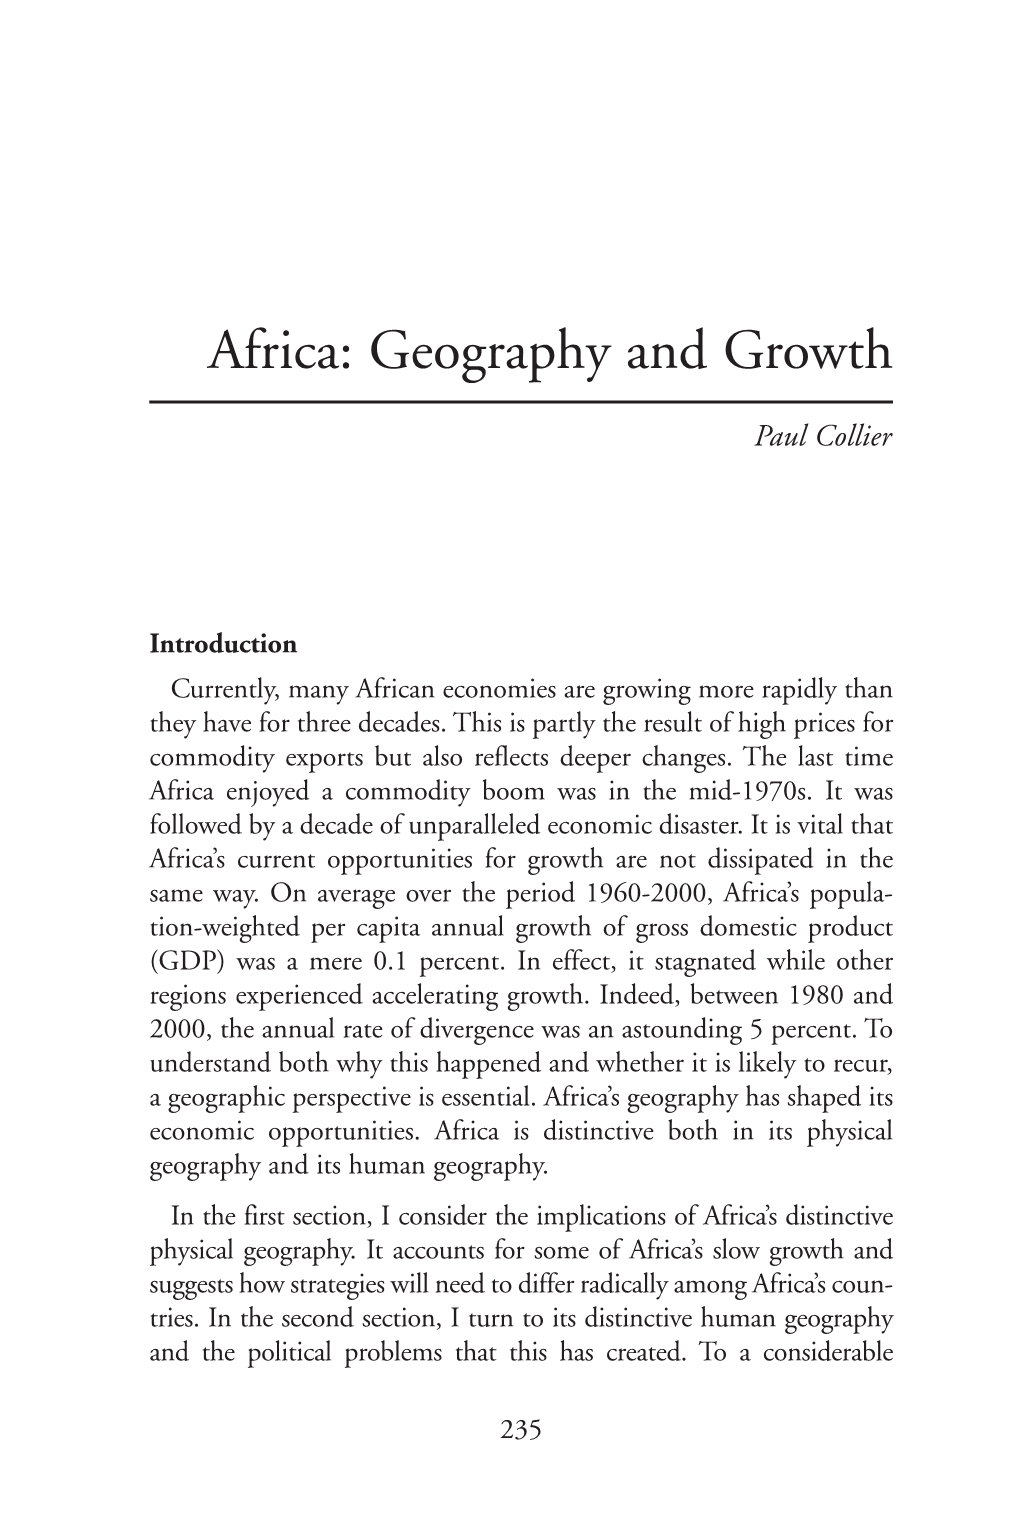 Africa: Geography and Growth